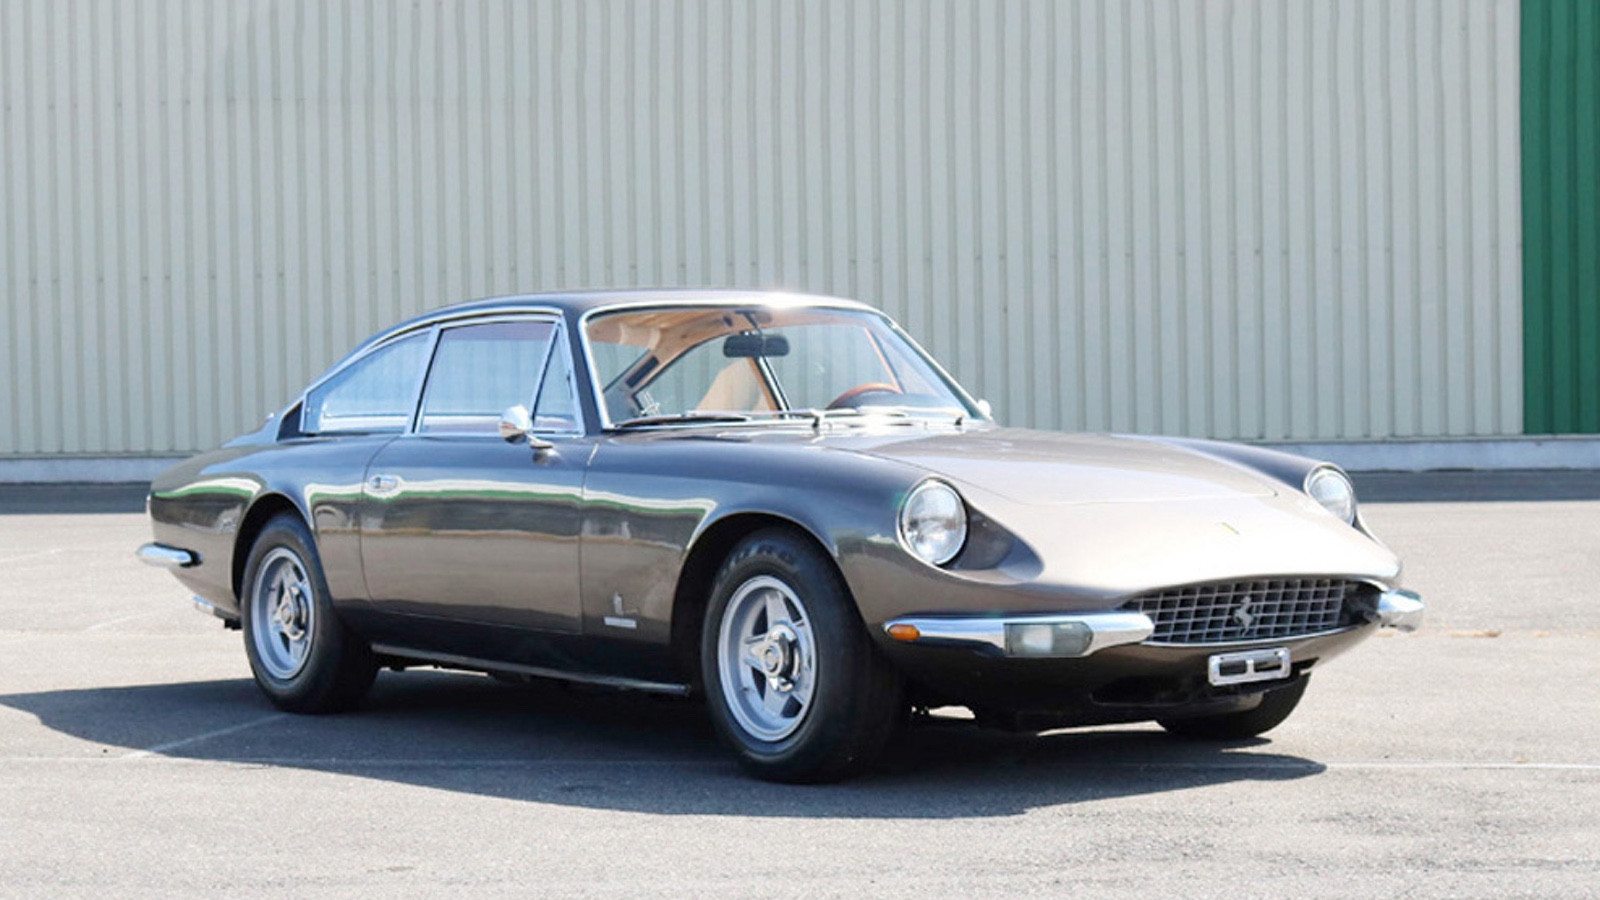 20 great cars up for grabs at Coys’ Monaco auction